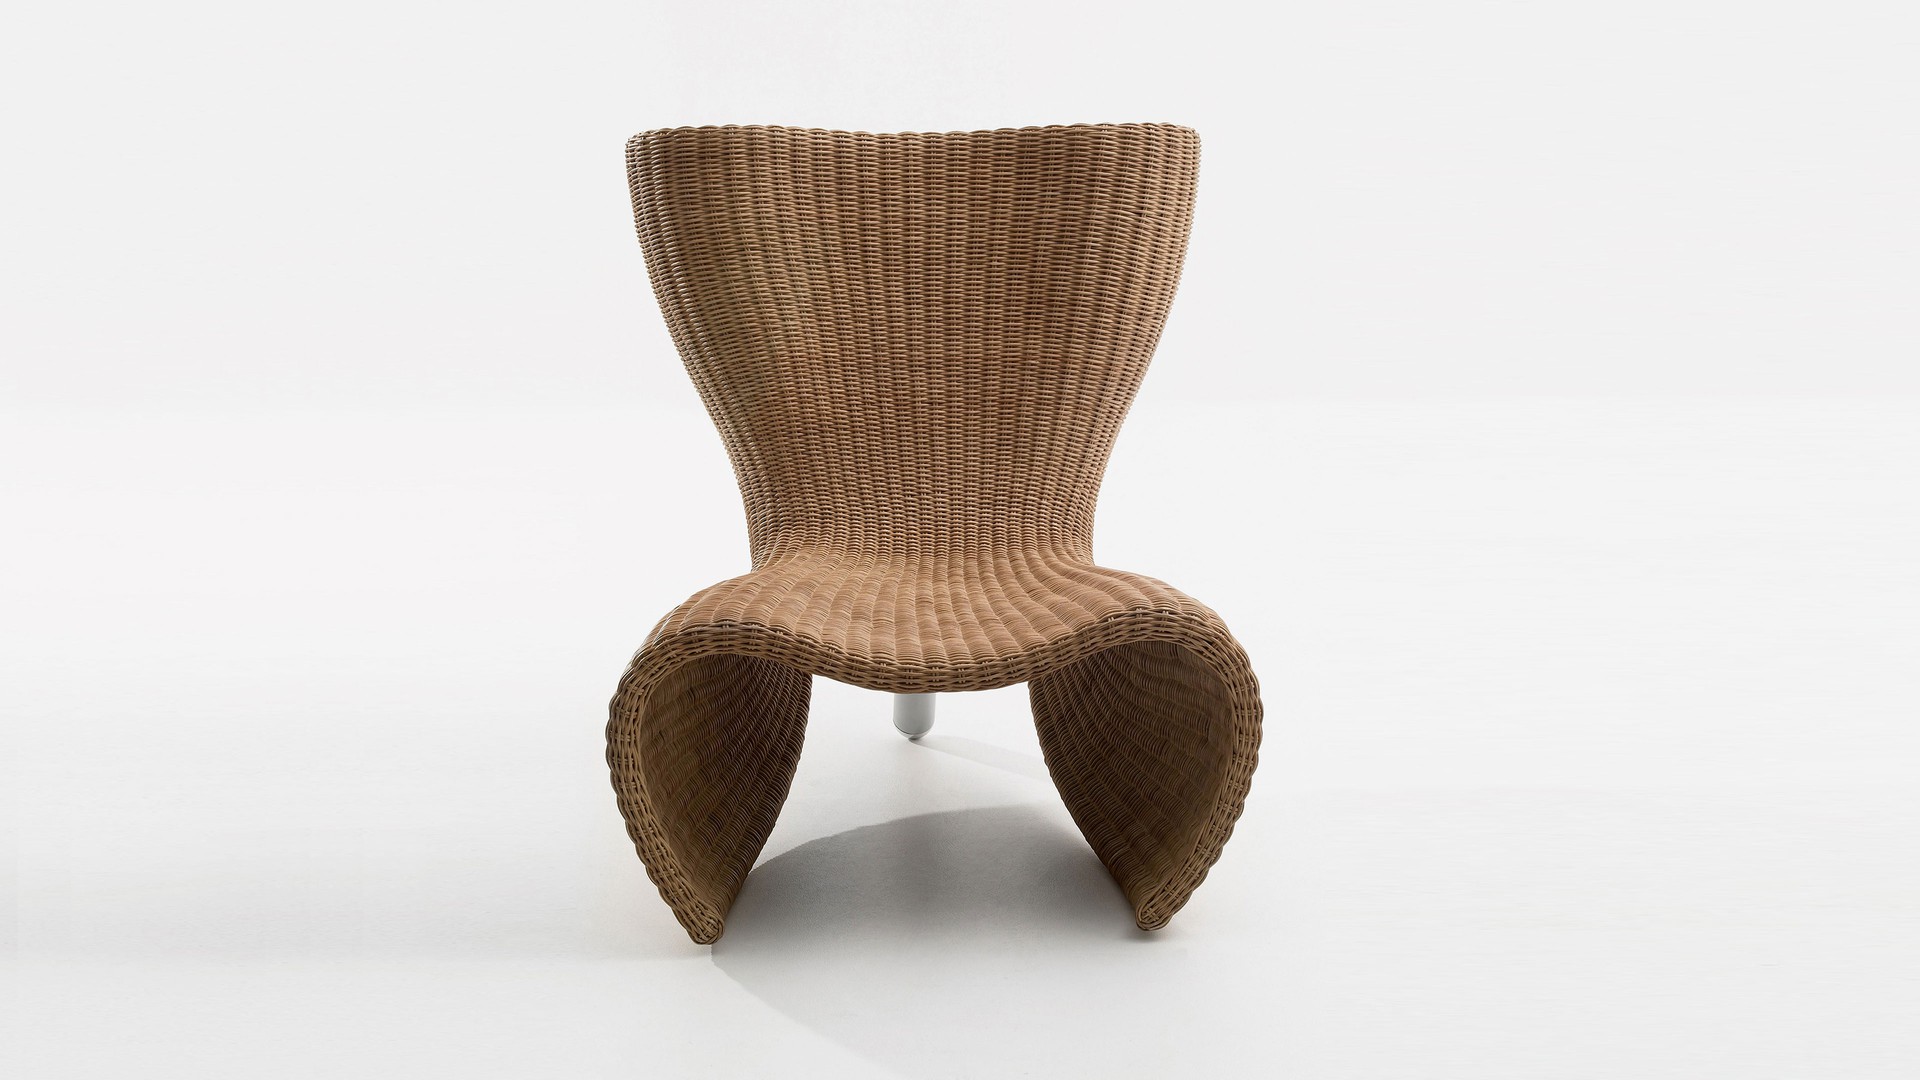 Wicker Chair And Lounge Marc Newson Ltd